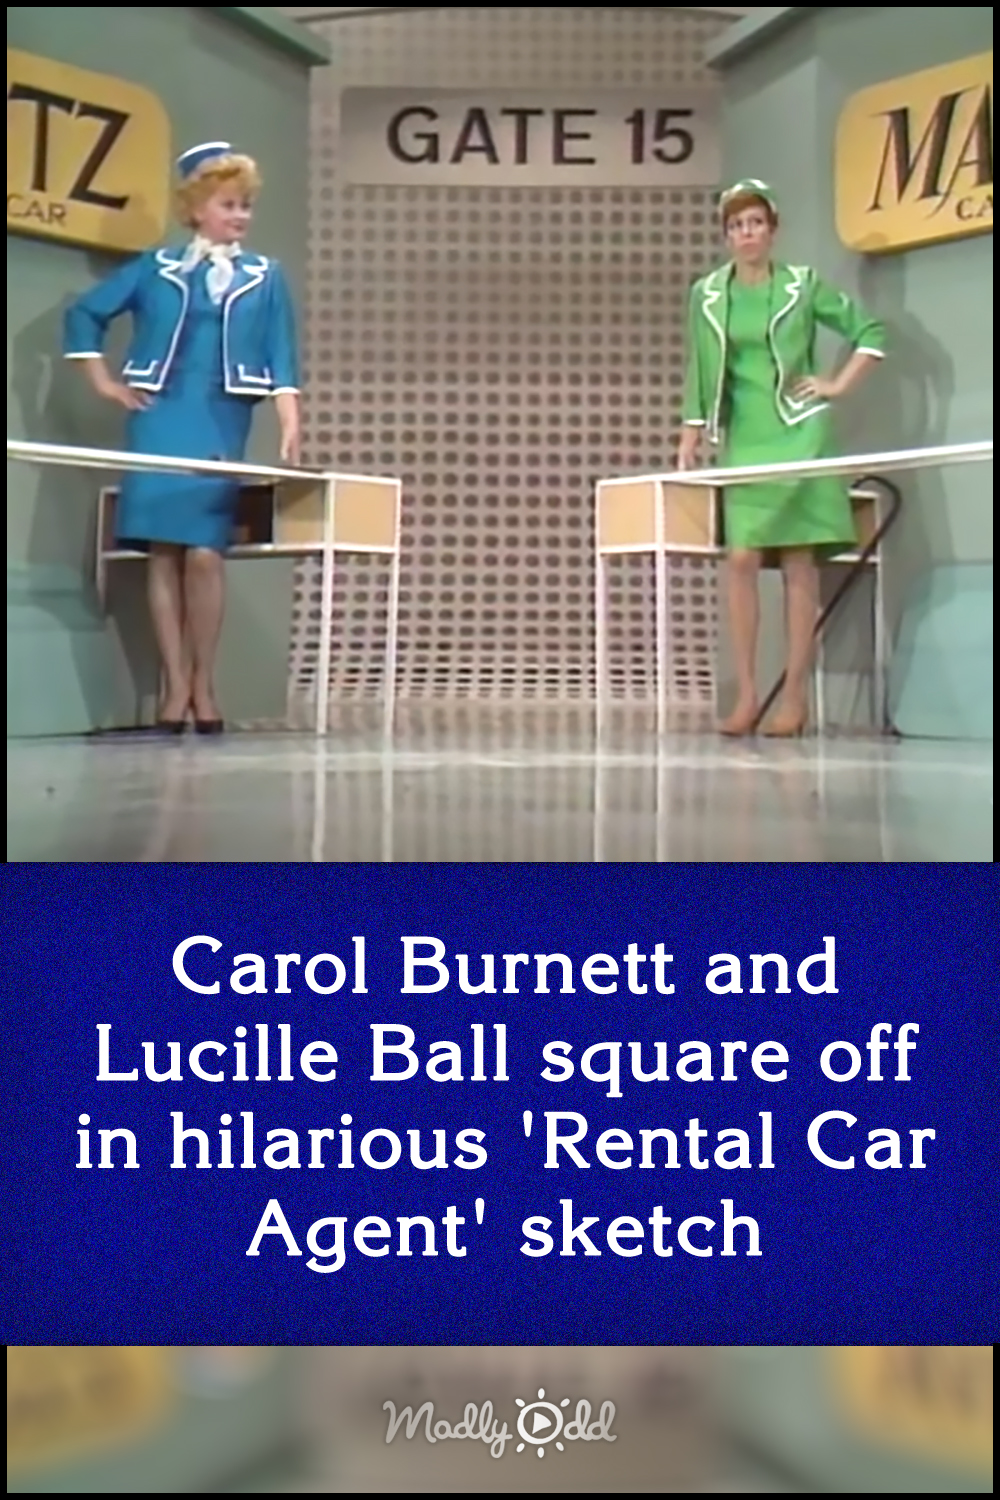 Carol Burnett and Lucille Ball square off in hilarious \'Rental Car Agent\' sketch